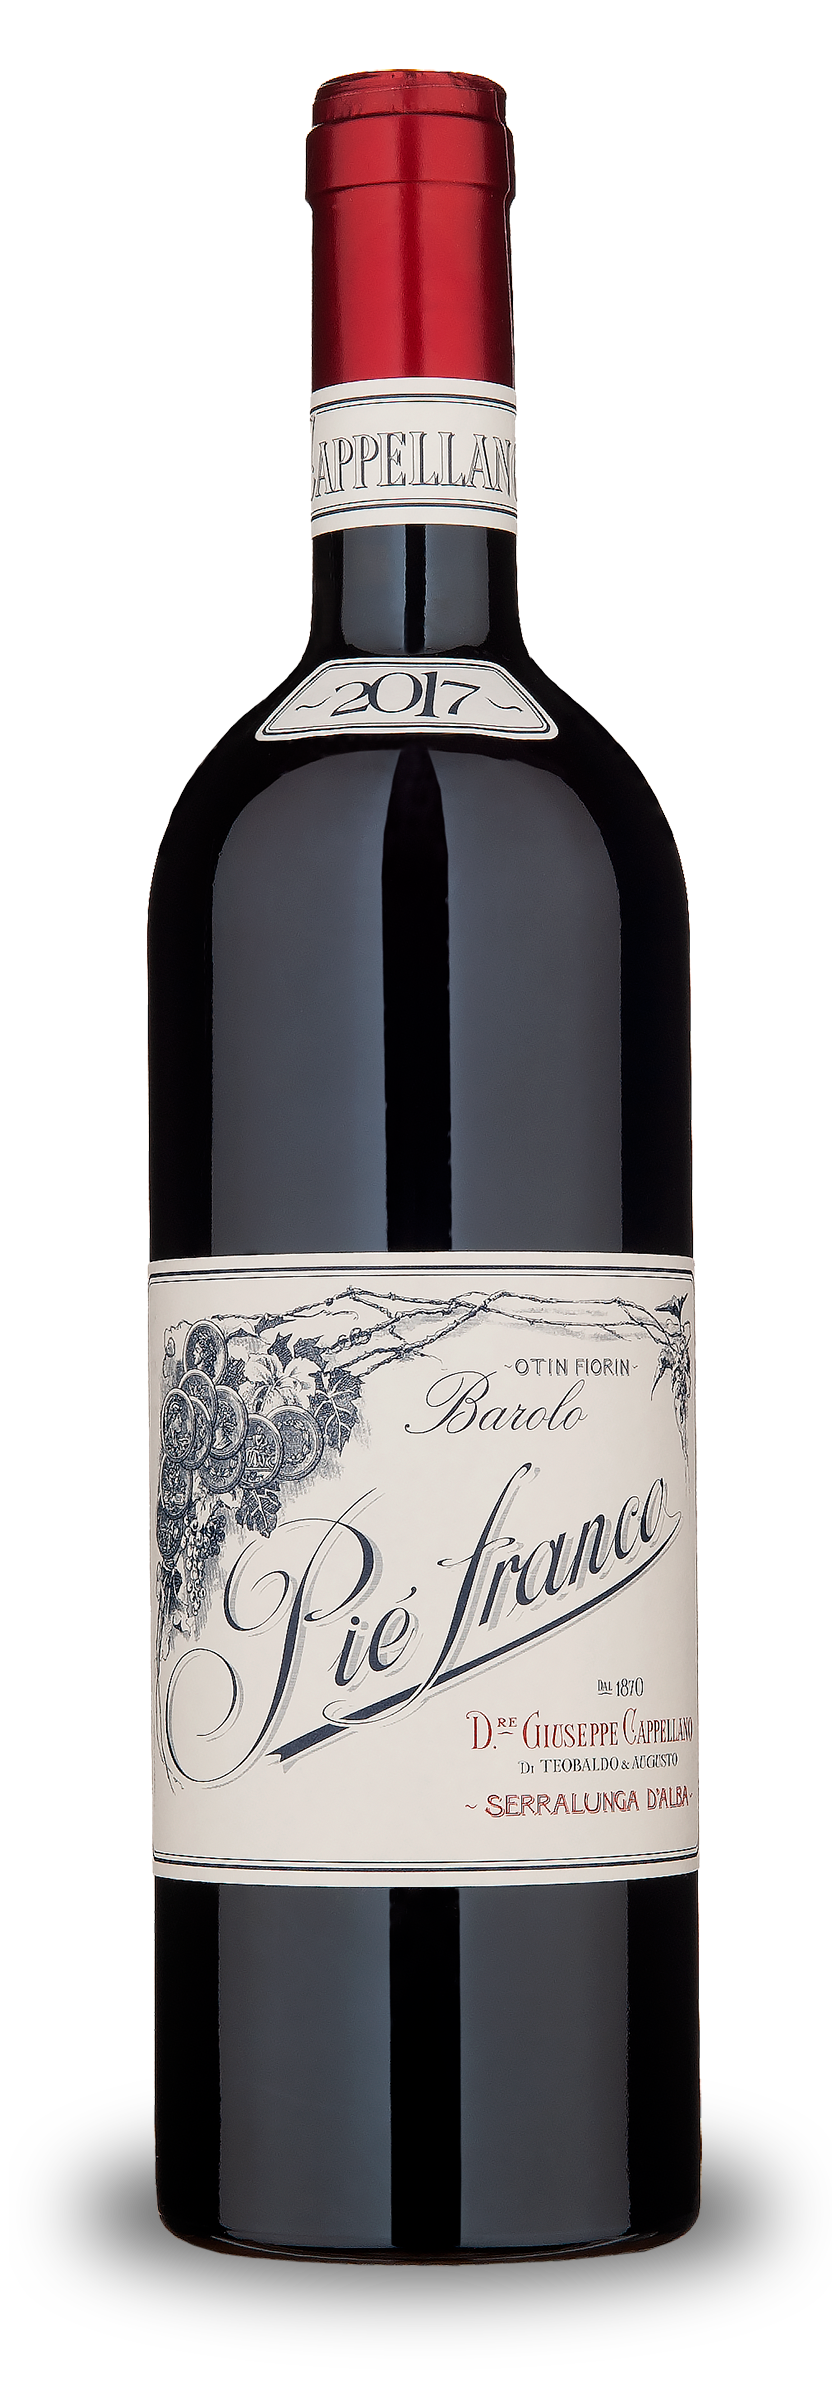 Barolo Piè Franco 2017 - ONLY ON PRE-ALLOCATION Contact us for further information (indulge@flemmings.wine)